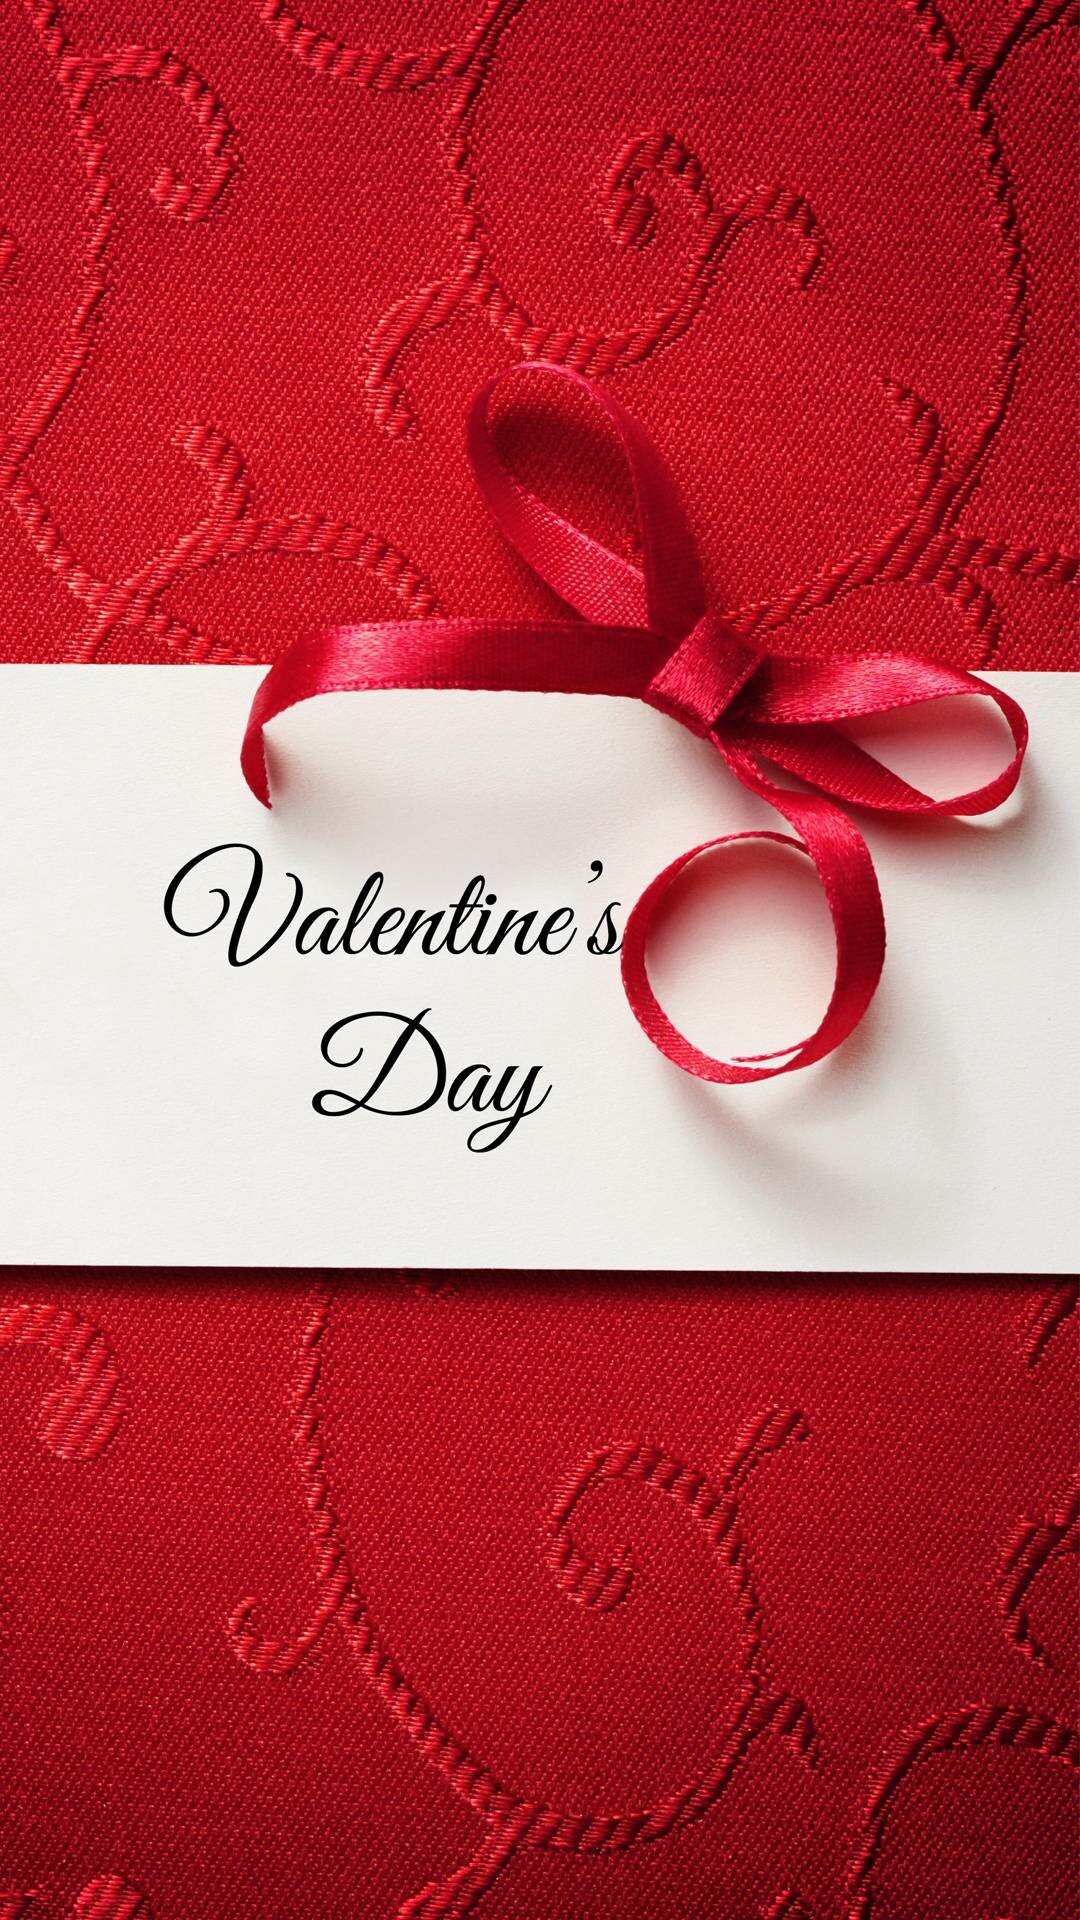 Valentine's Day wallpapers, Love-filled atmosphere, Romantic vibes, Digital backgrounds, 1080x1920 Full HD Phone